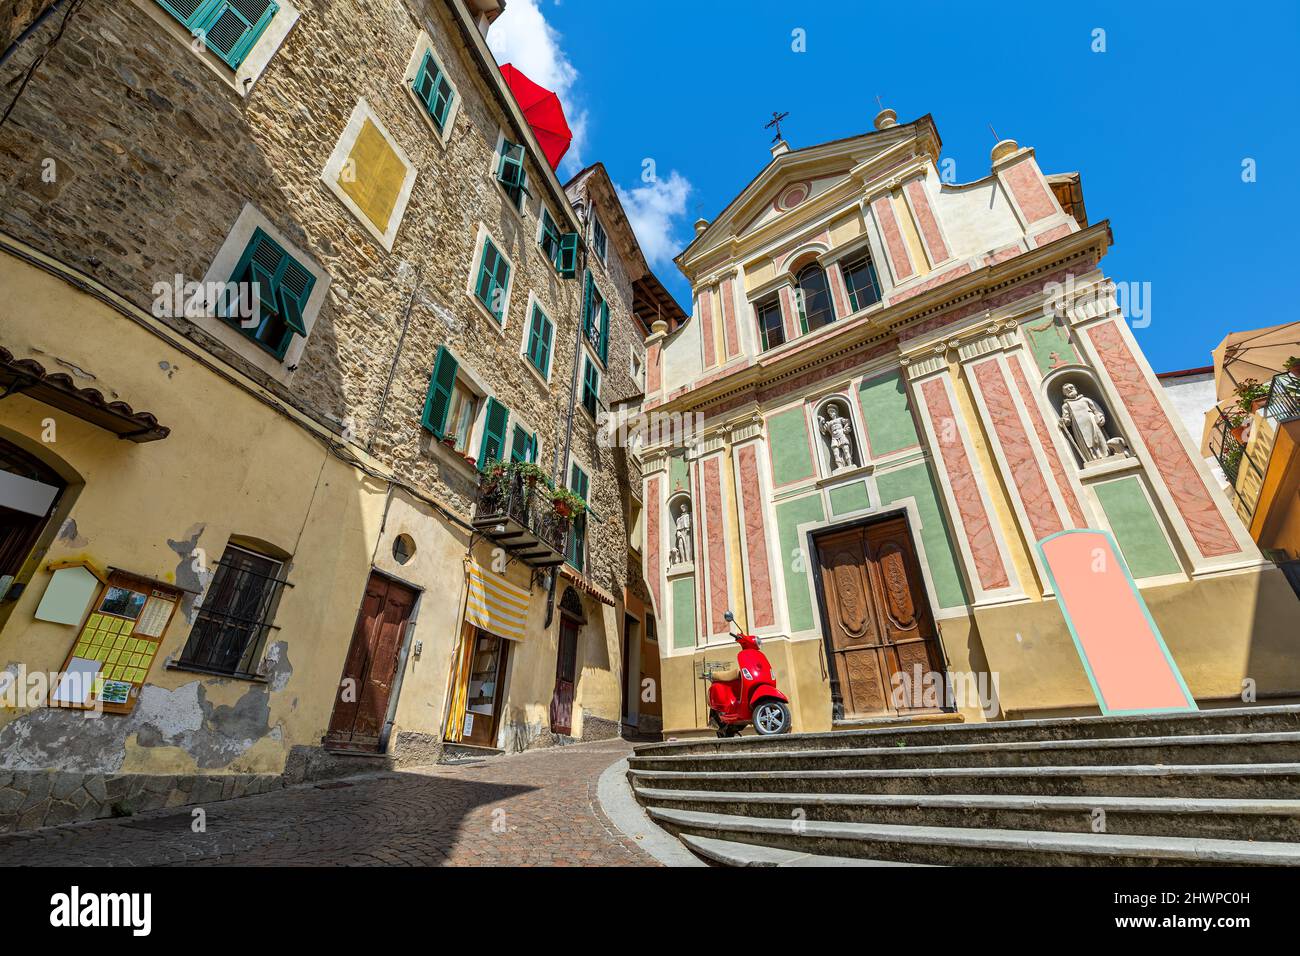 Red scooter on small town square among old stone houses and catholic church under blue sky in Dolceacqua, Liguria, Italy. Stock Photo